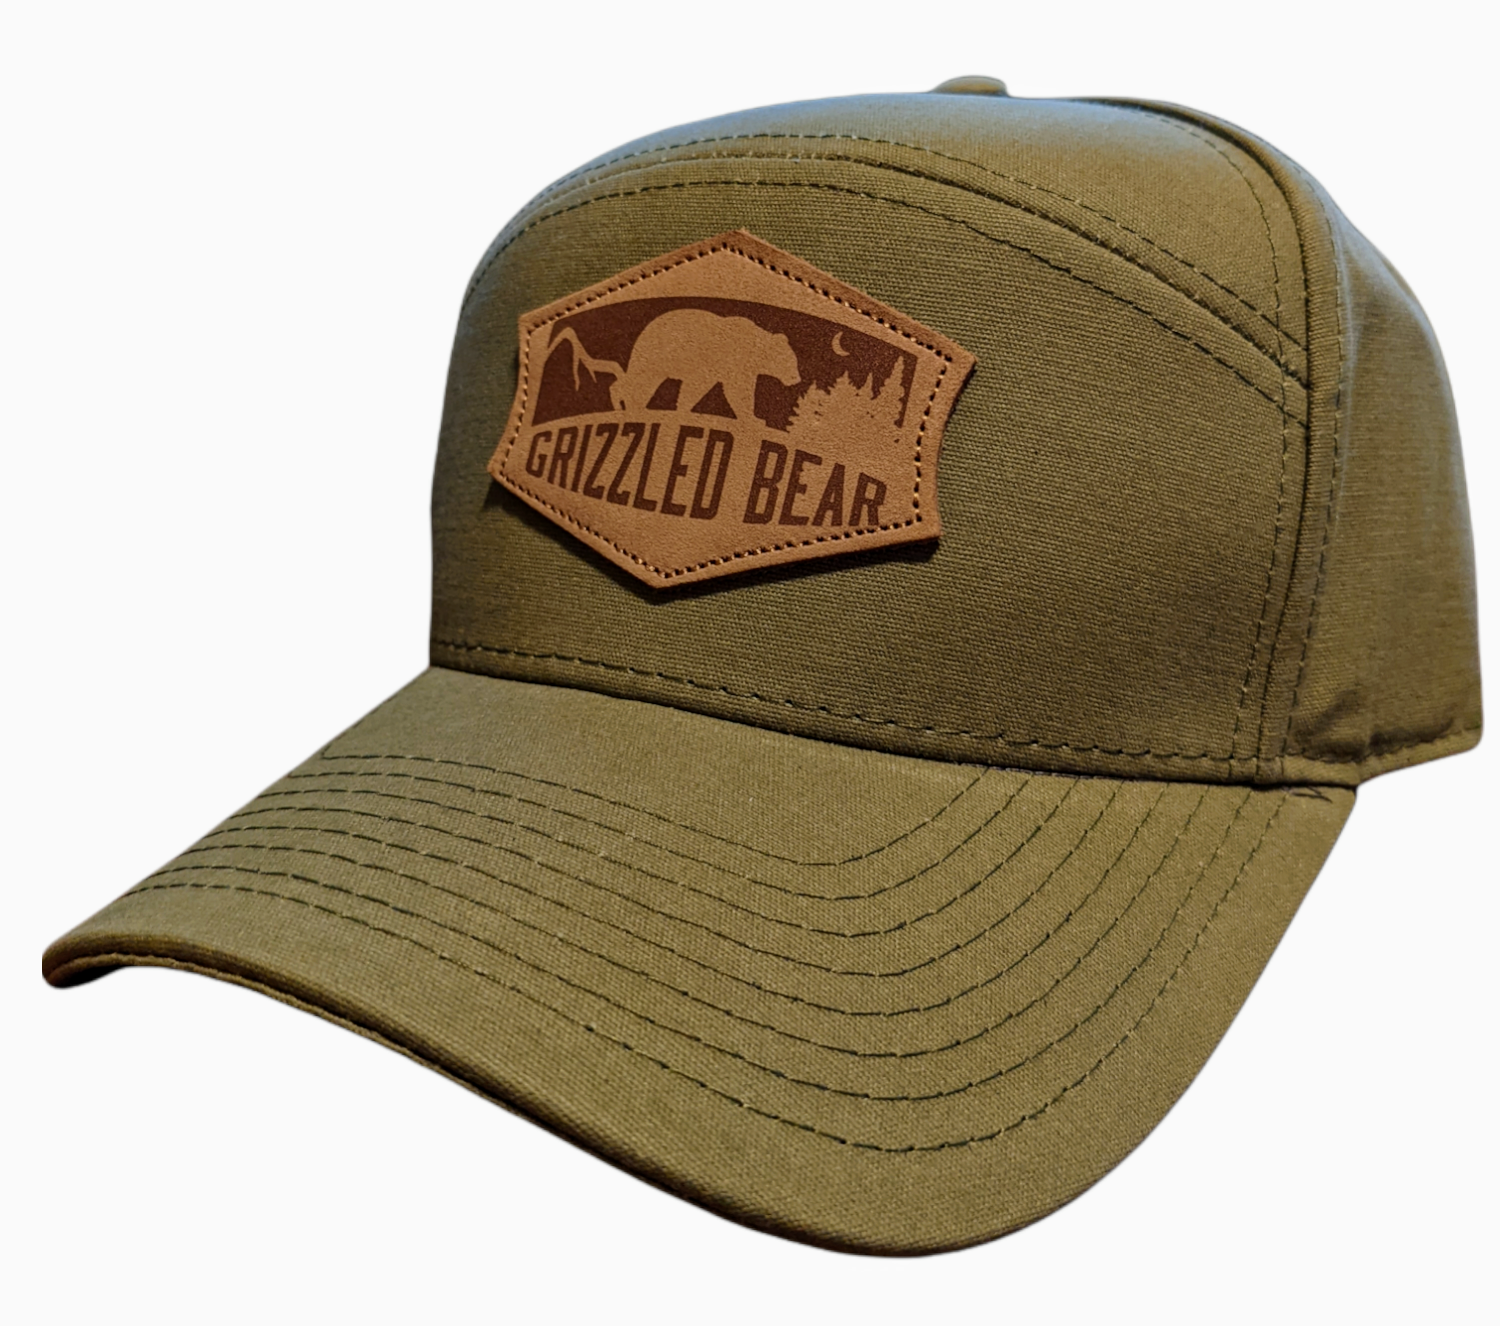 Waxed Canvas hat - Grassy Meadow